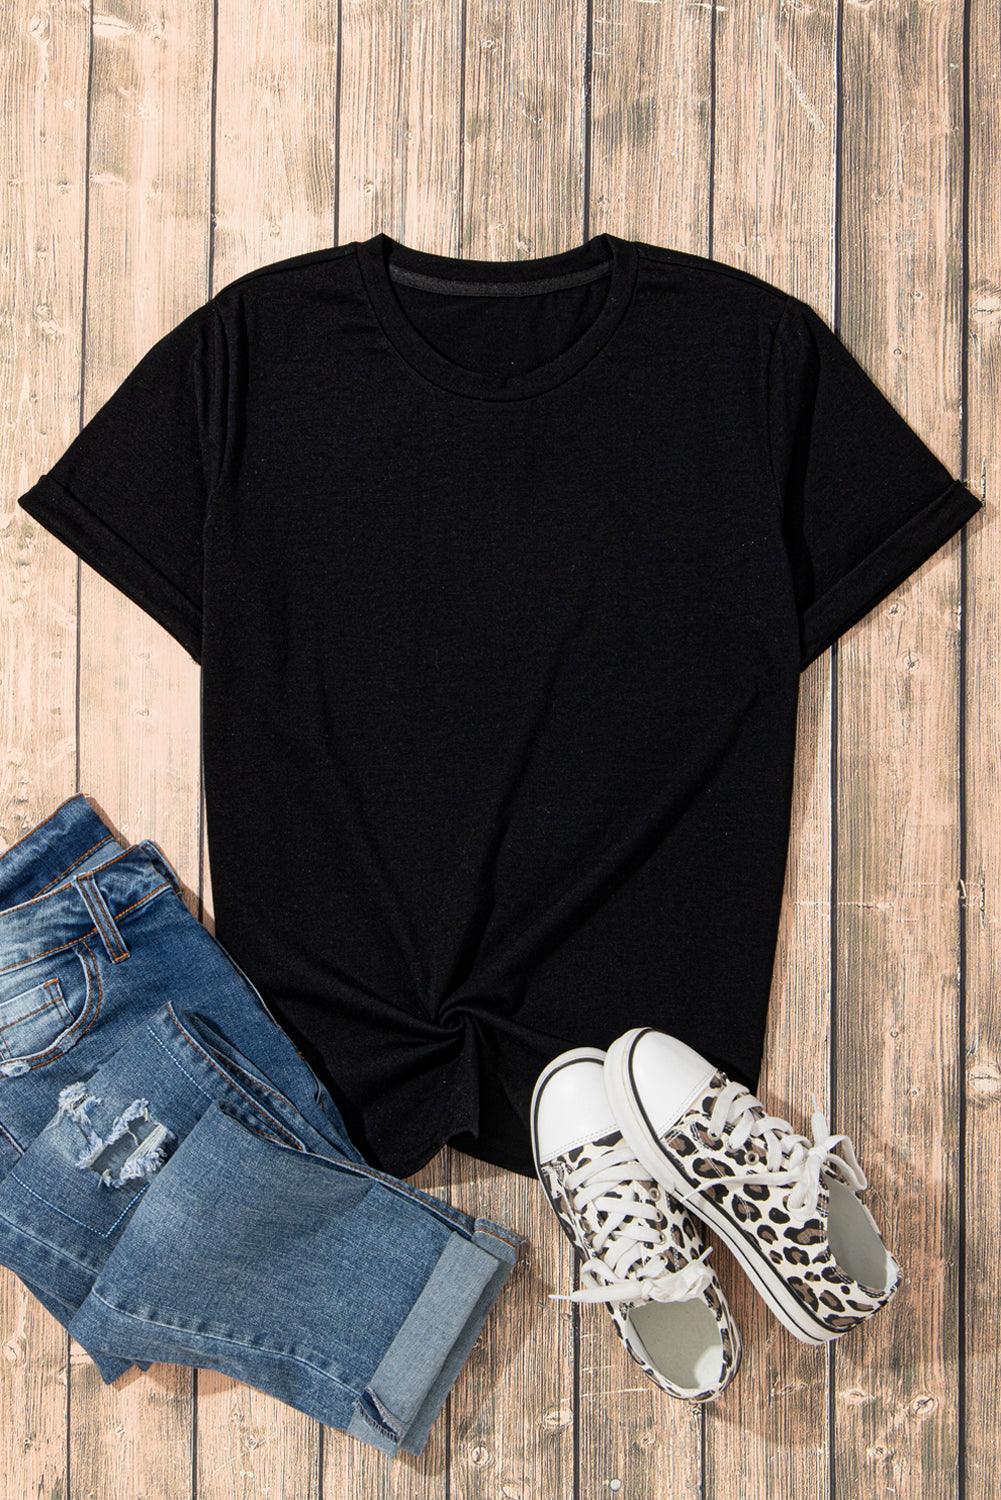 Womens Crew Neck Summer Casual Loose Fit Black T-Shirt